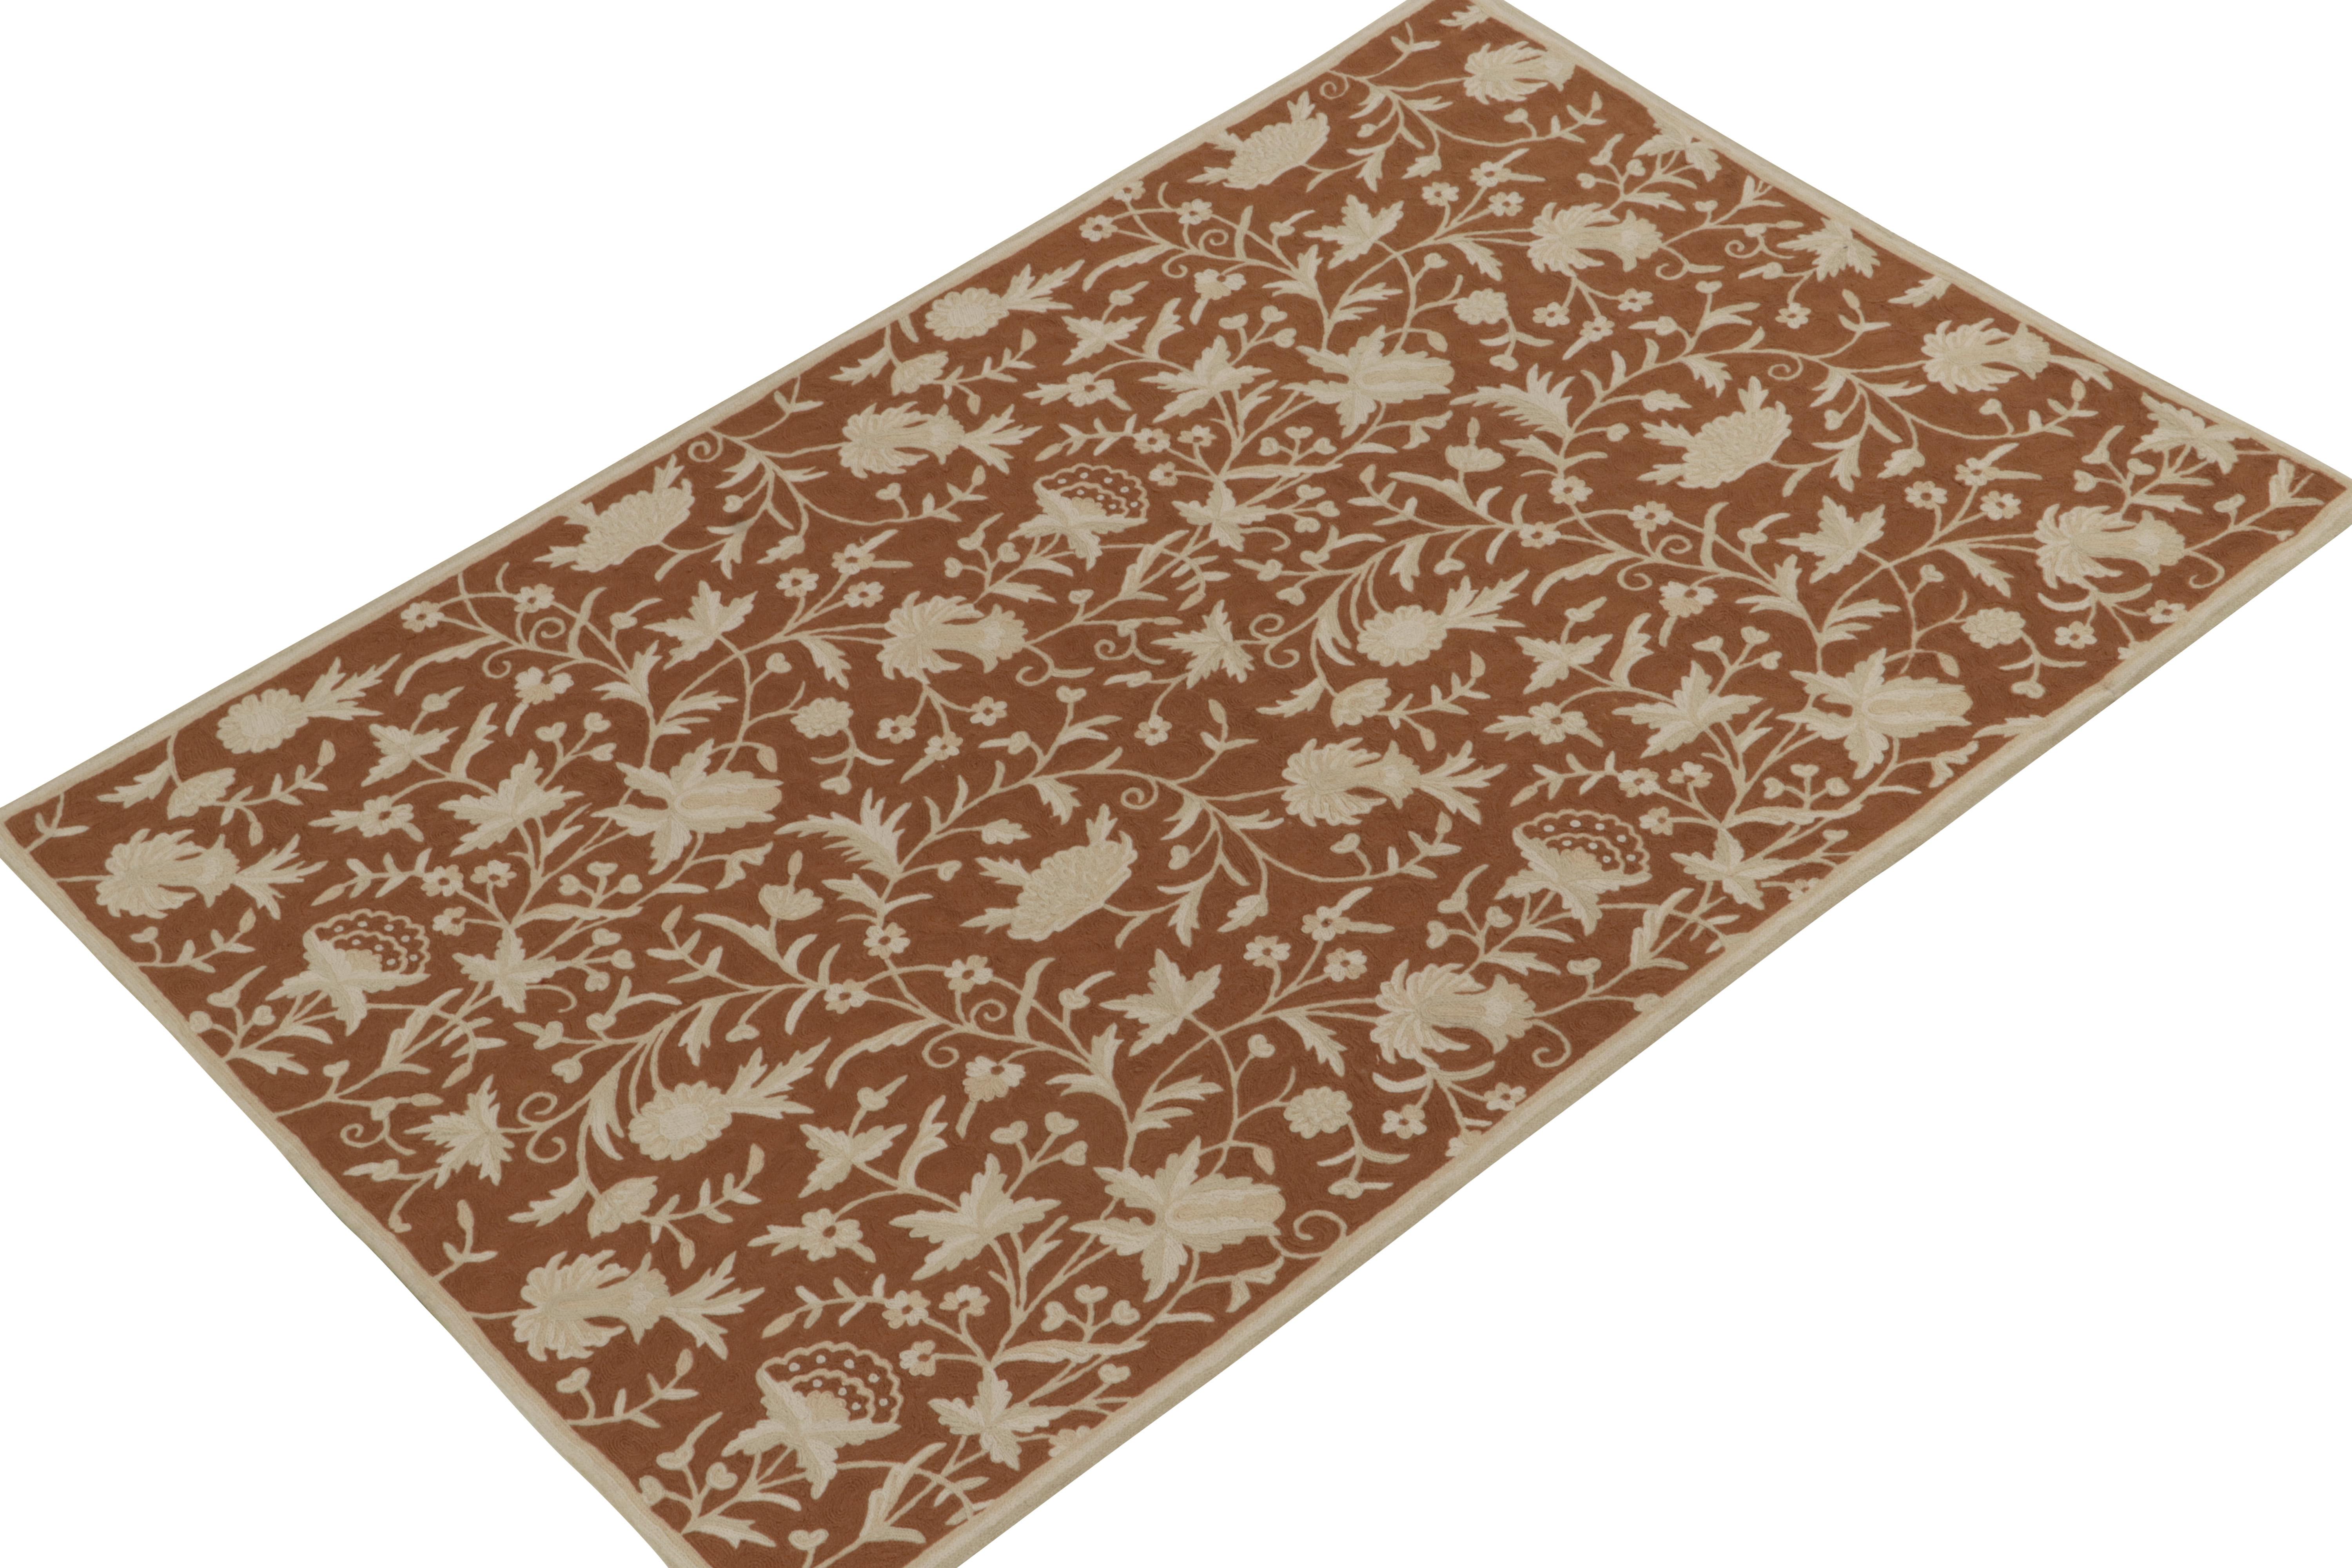 From Rug & Kilim’s newest selections, a 4x6 kilim marking a refreshing take on contemporary flat weave design. This particular rug draws on European botanical sensibilities in brown and a creamy beige pattern for a gorgeous, yet forgiving visual